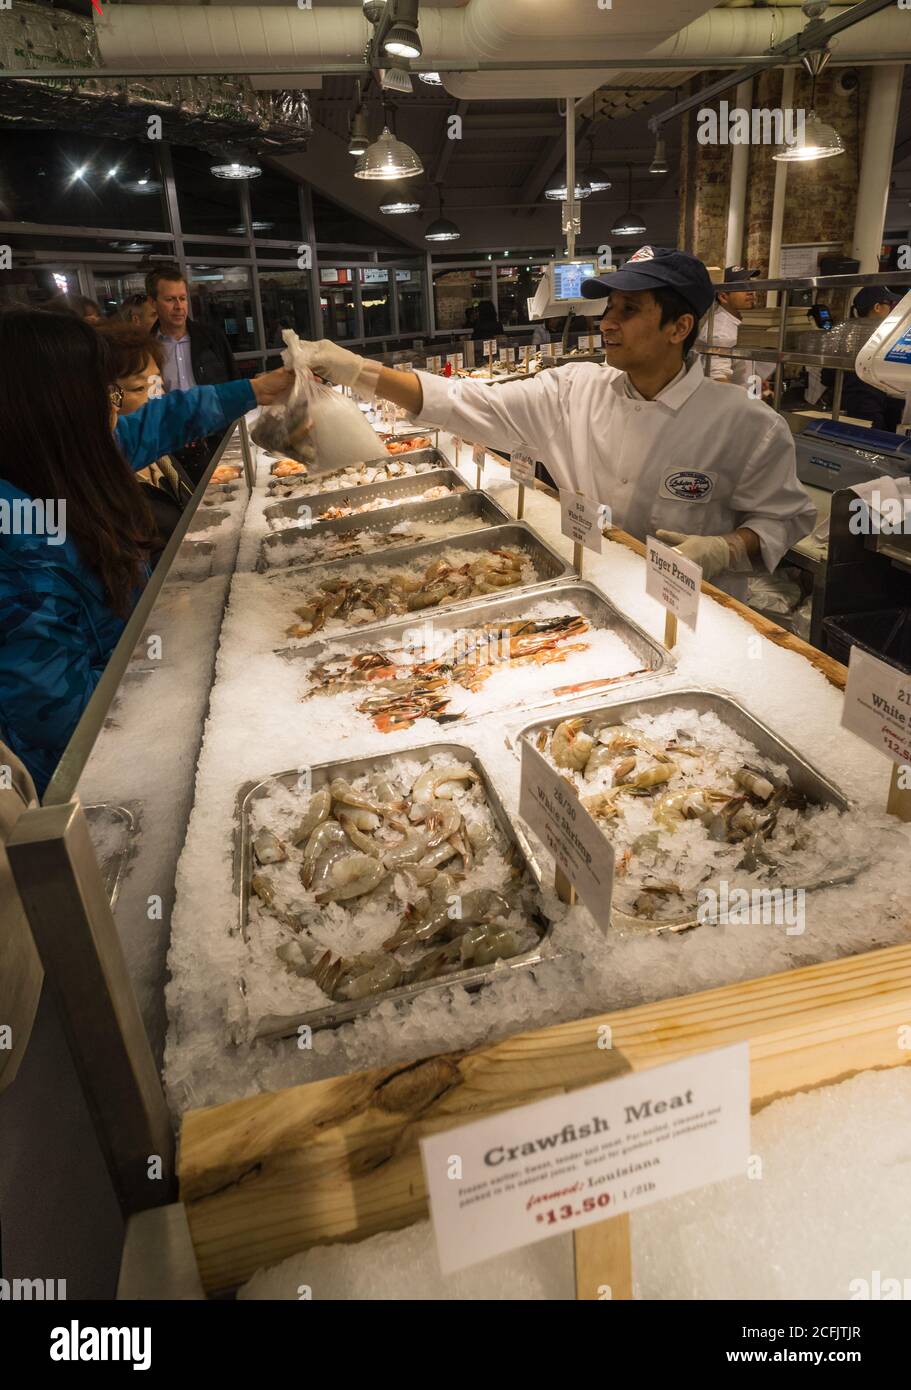 Chelsea Market, New York City - 18th May 2016: People buying fresh fish at the Chelsea market in New York. The Chelsea Market has a variety of food ma Stock Photo